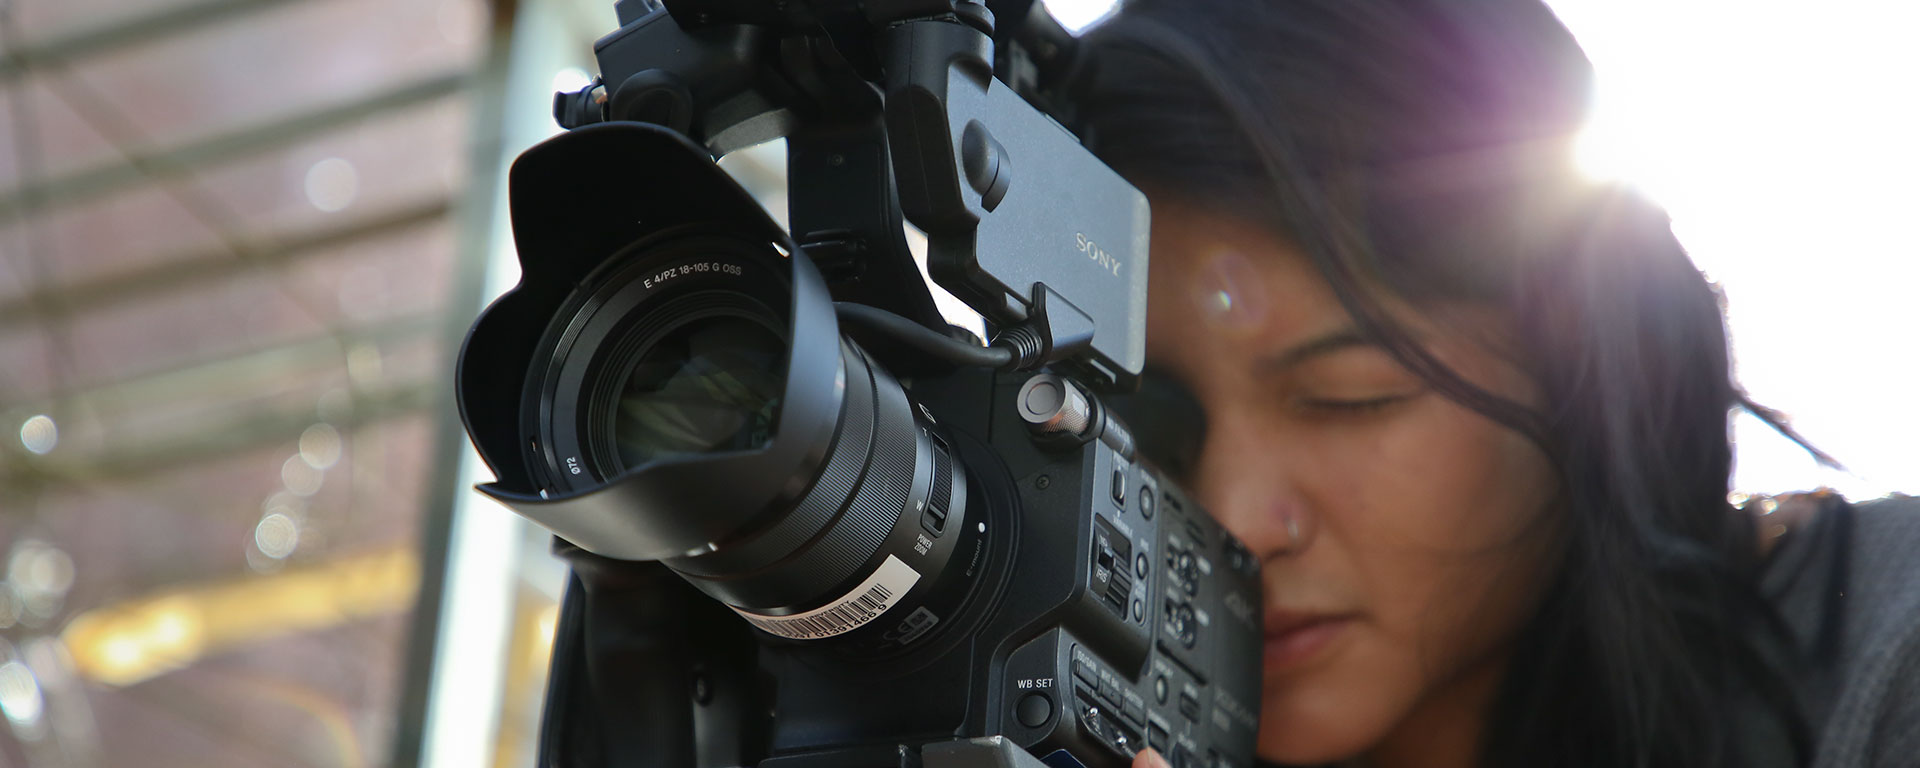 A young woman uses a video camera